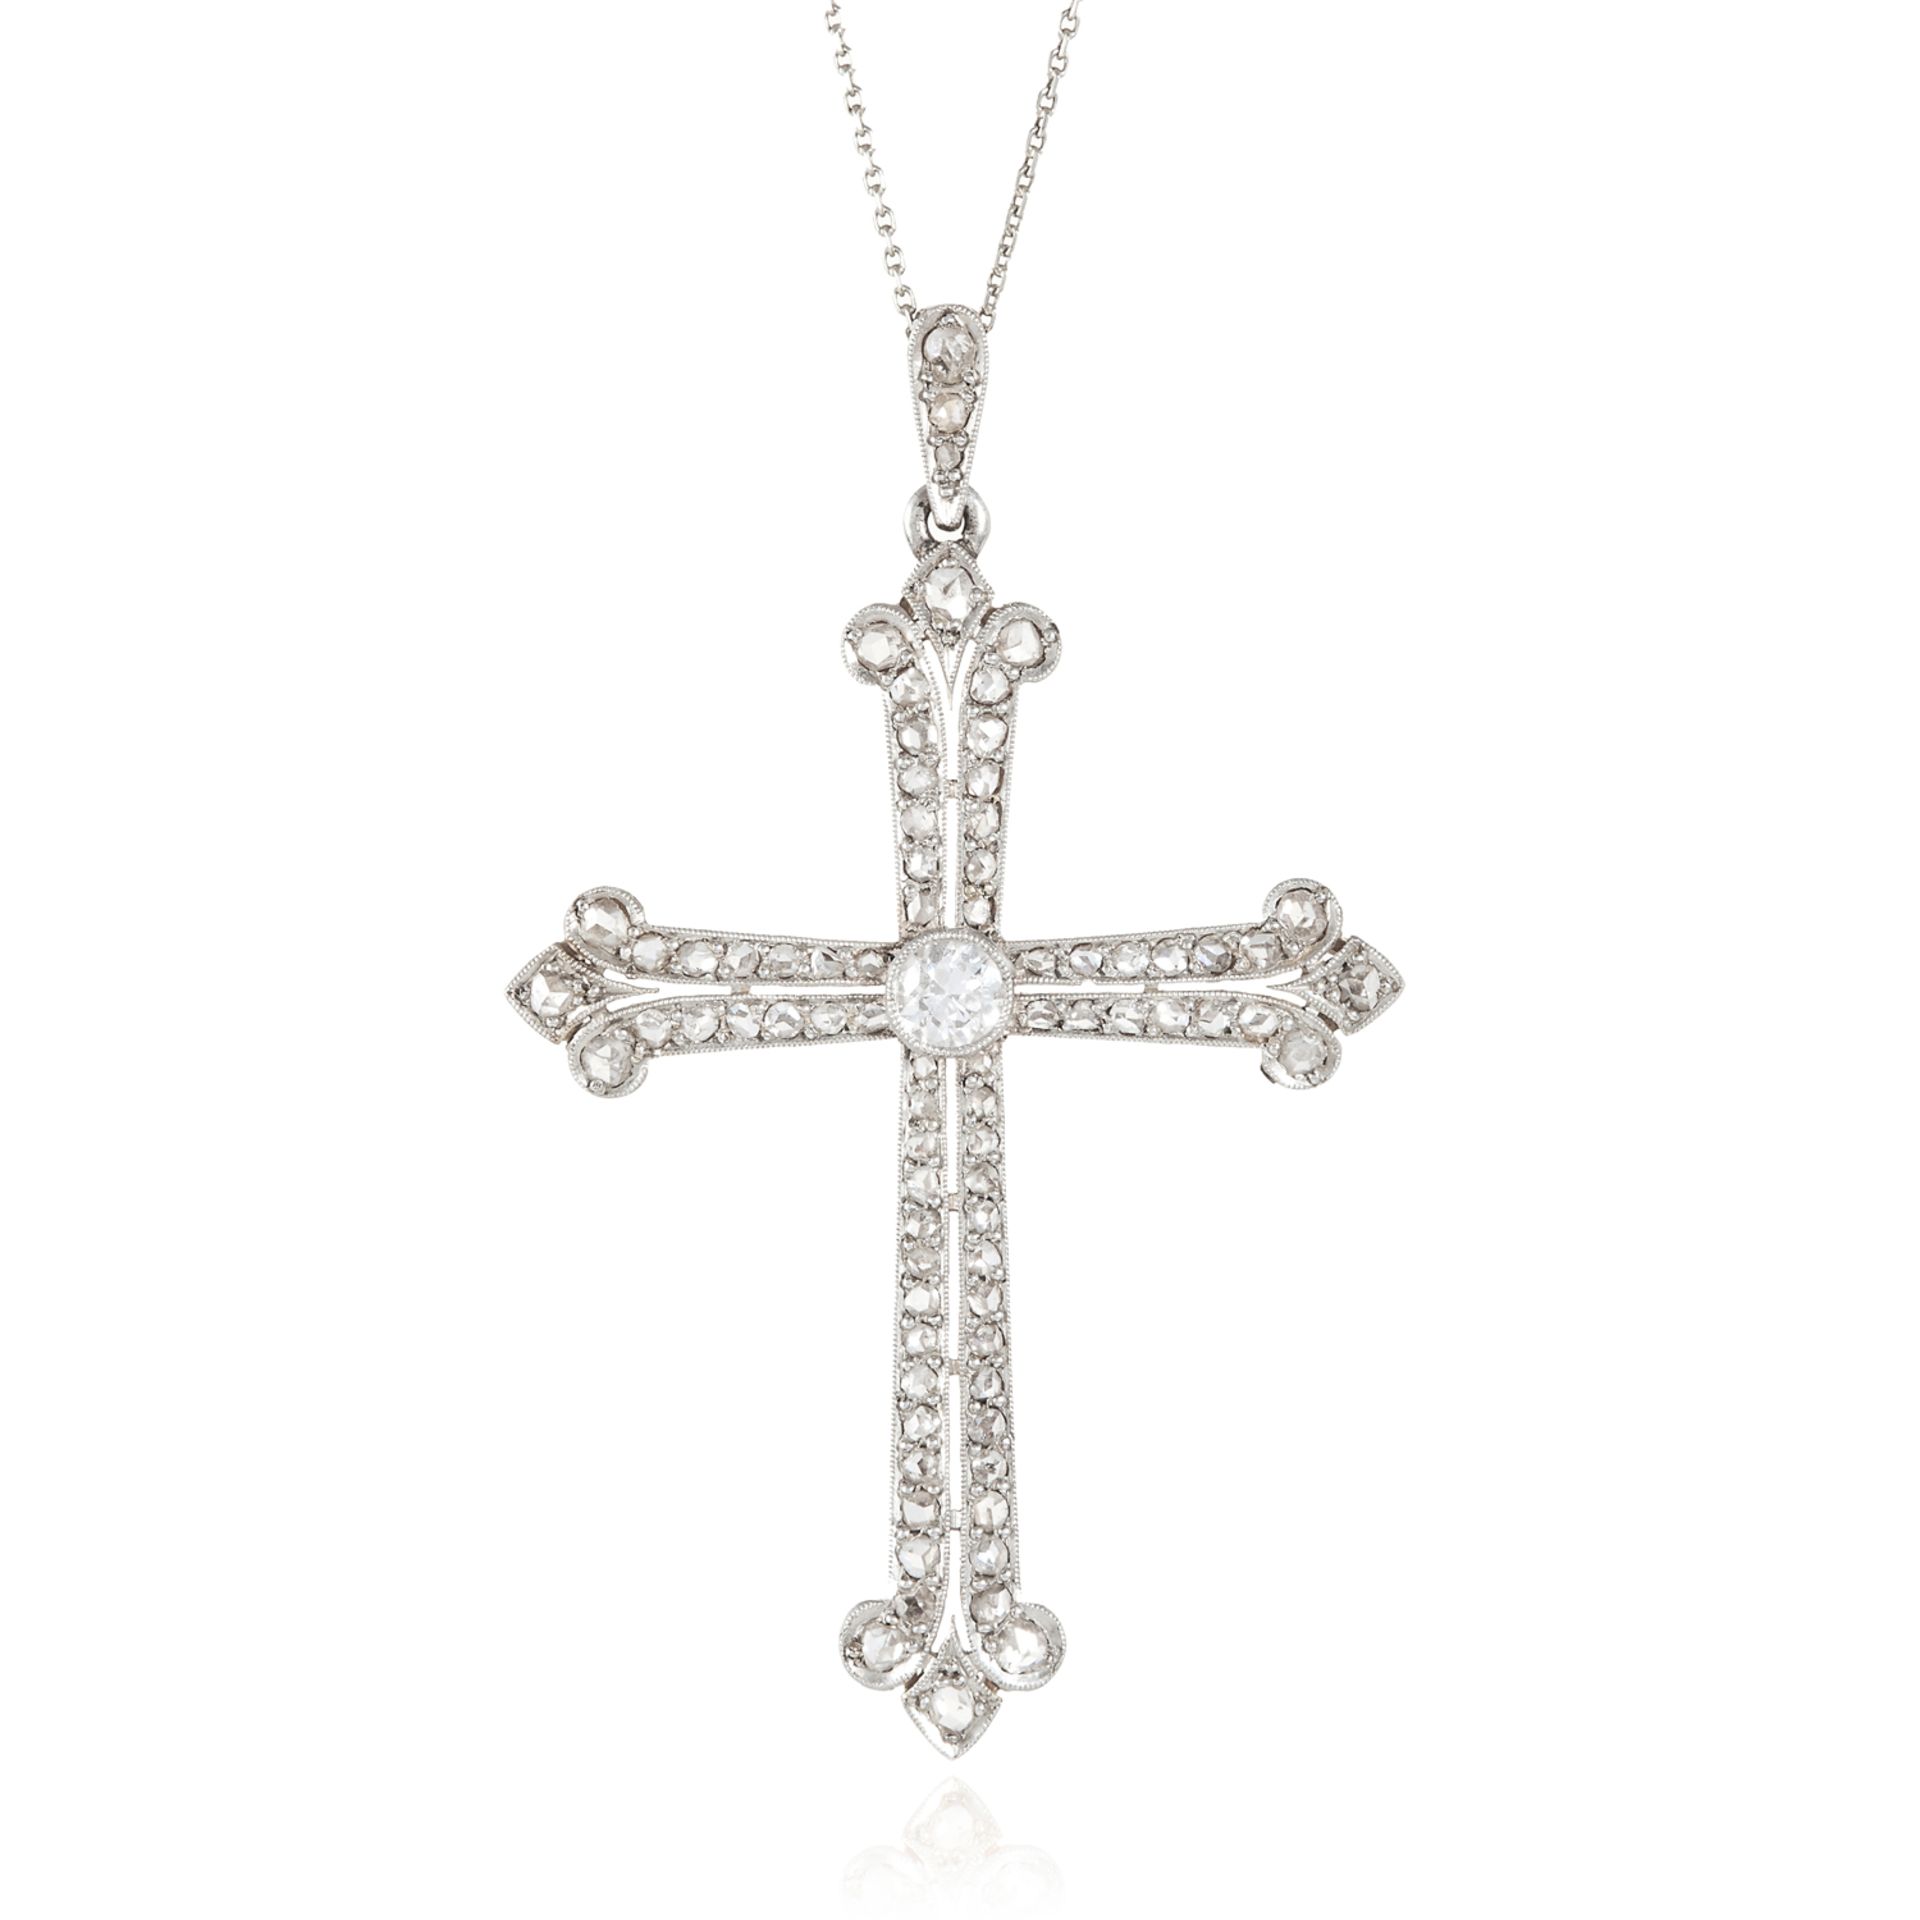 AN ANTIQUE DIAMOND CRUCIFIX PENDANT in gold and platinum, the cross design jewelled with round and